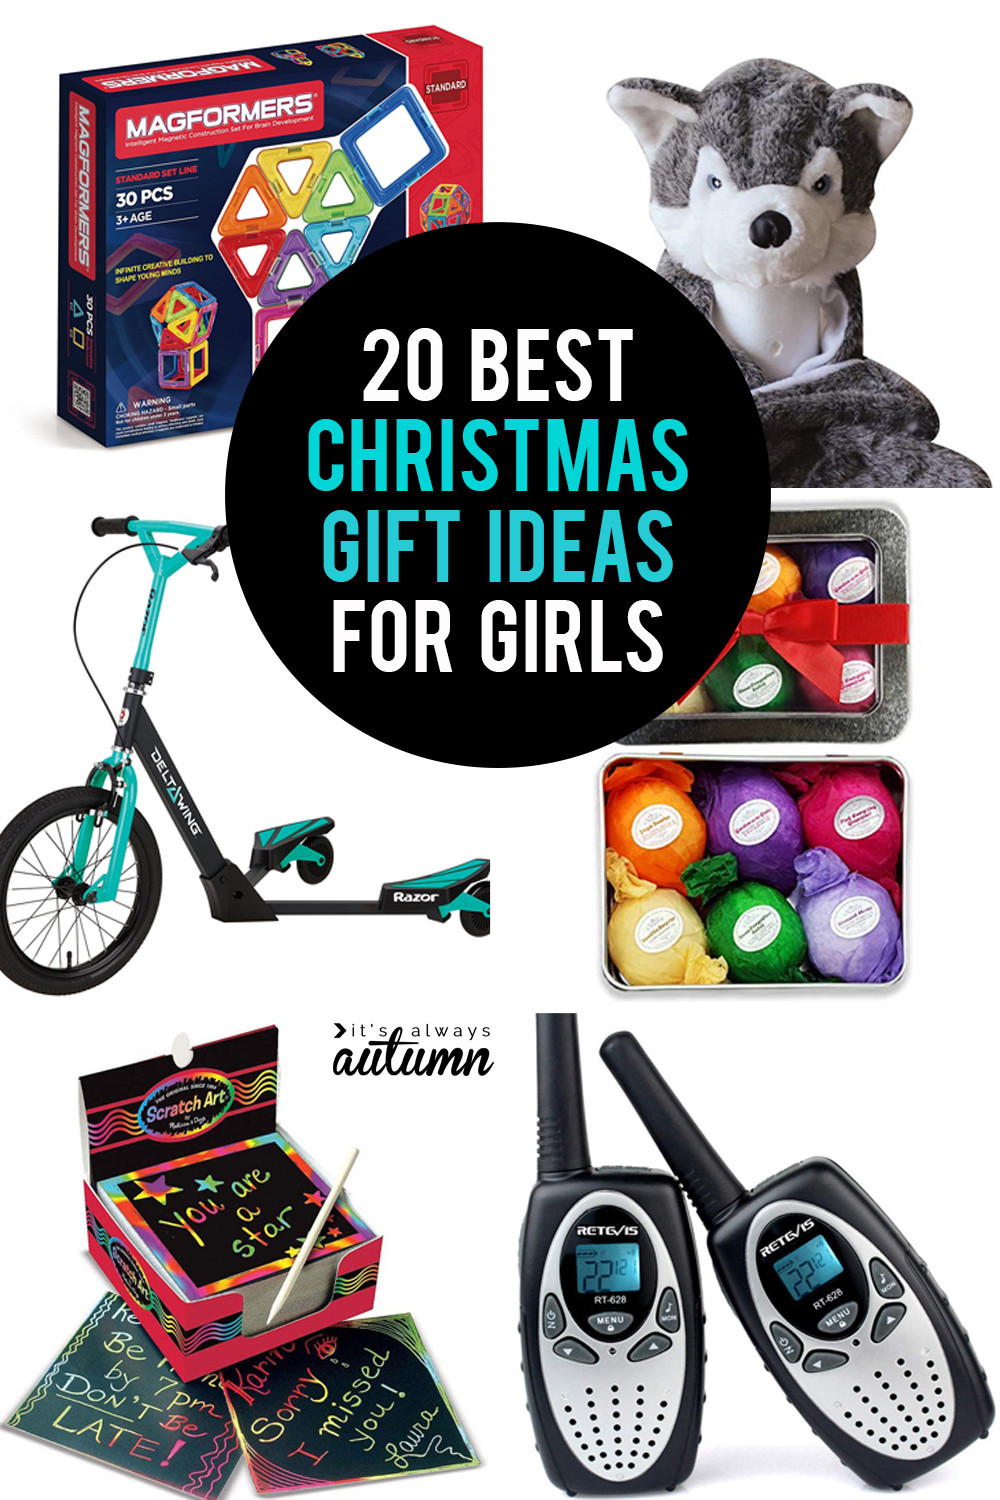 Good Holiday Gift Ideas
 The 20 best Christmas ts for girls It s Always Autumn